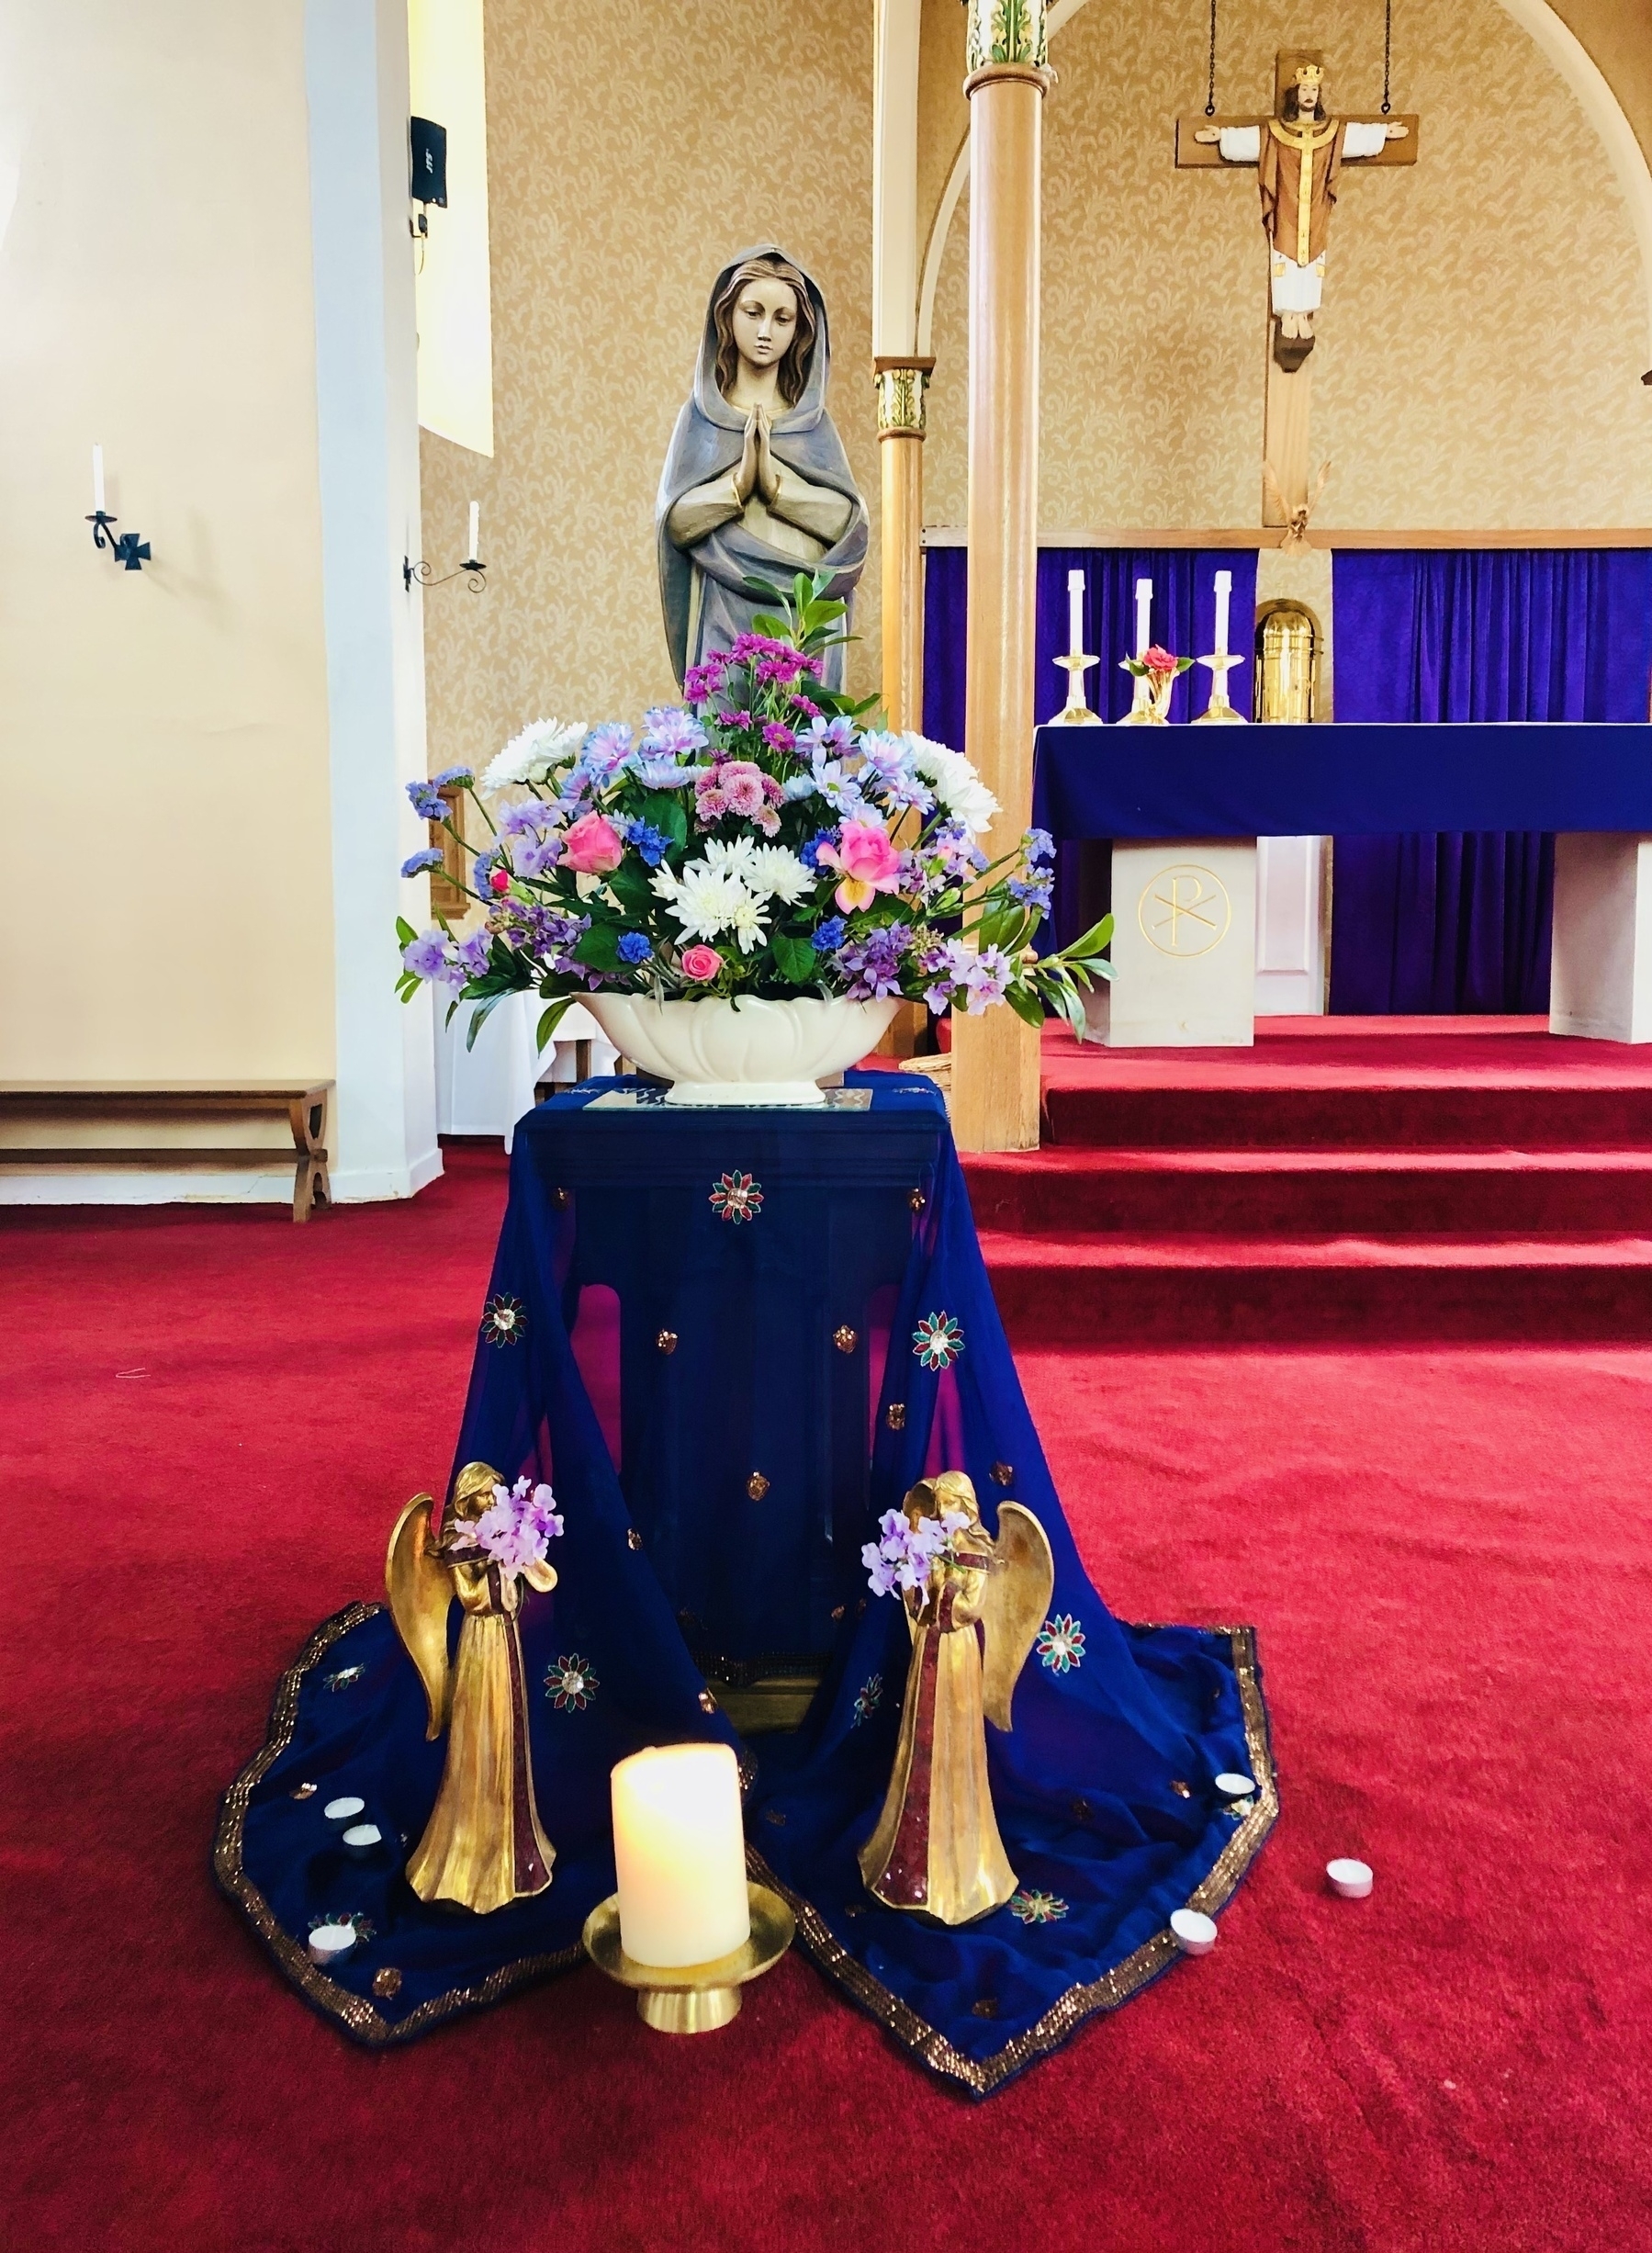 statue of the Virgin Mary surrounded by flowers and angels on a red carpet at the front of church